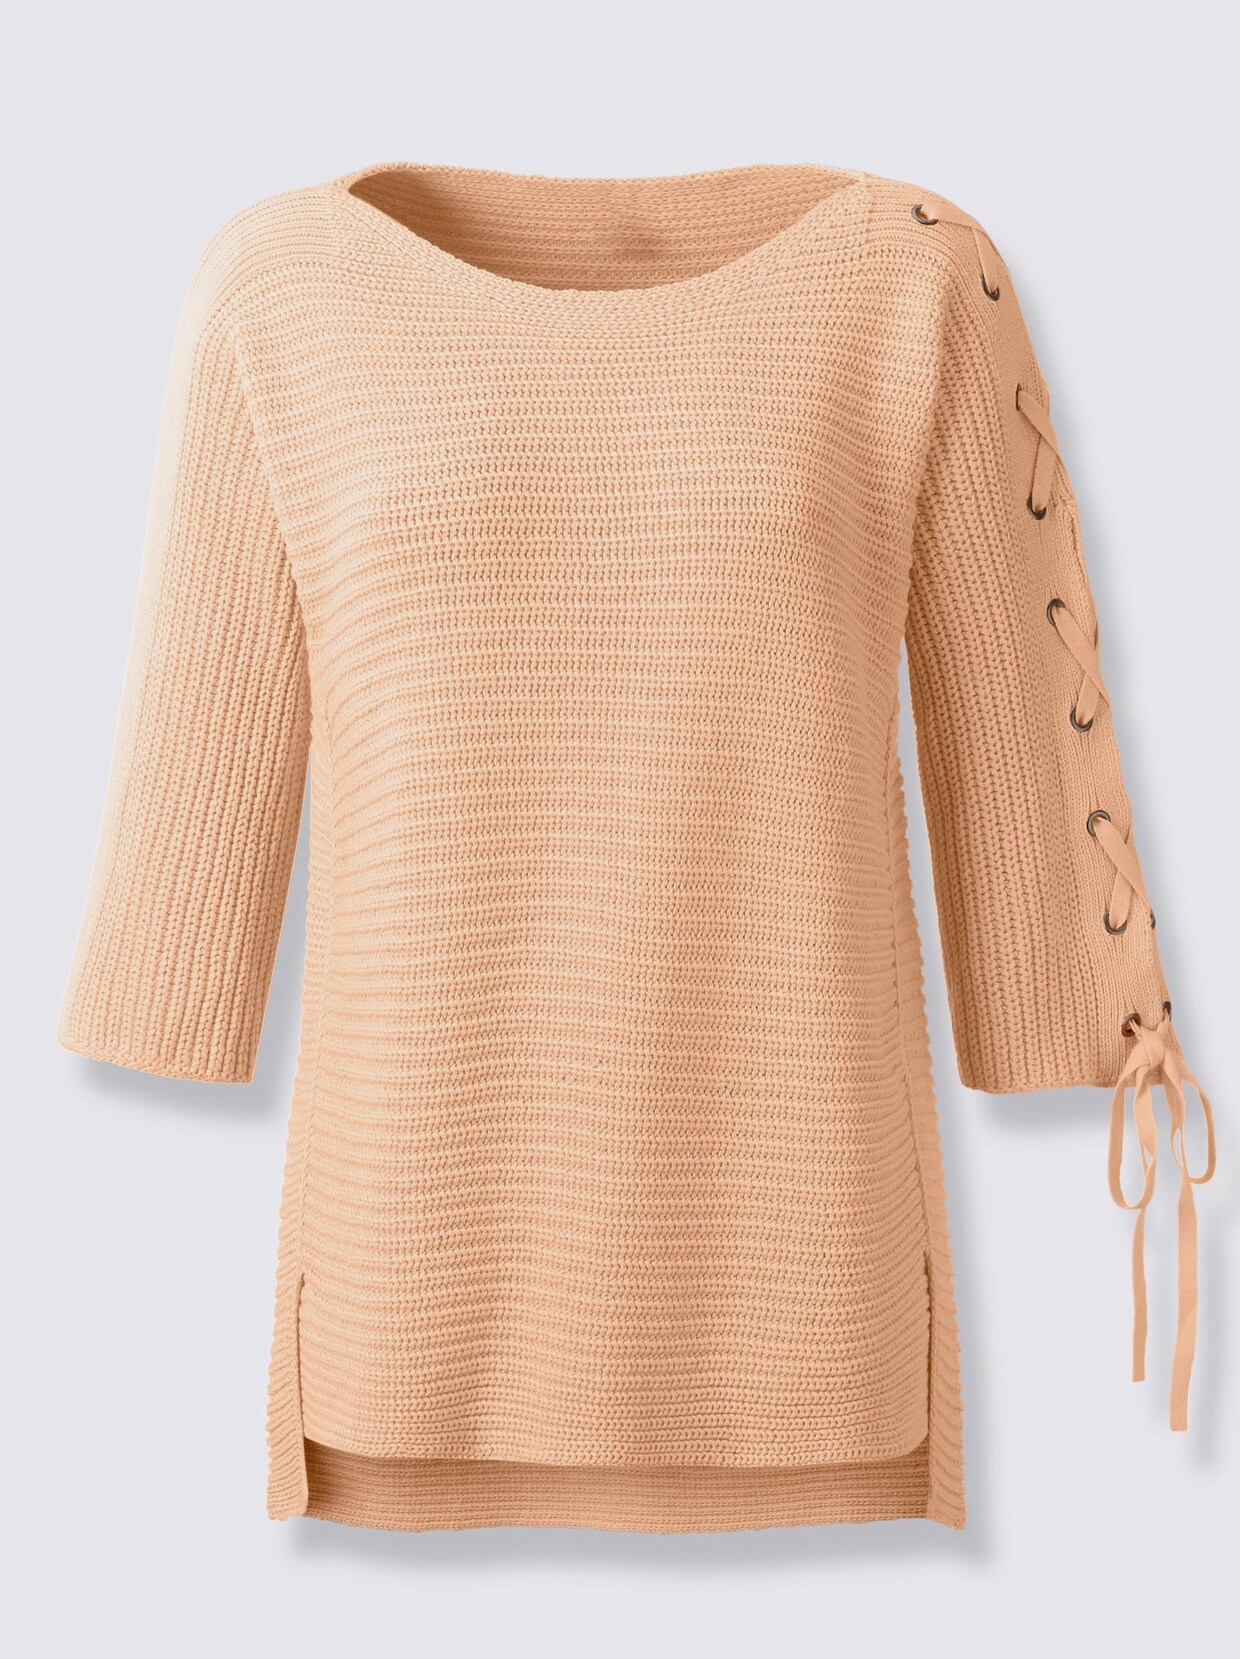 Best Connections Pullover - apricot